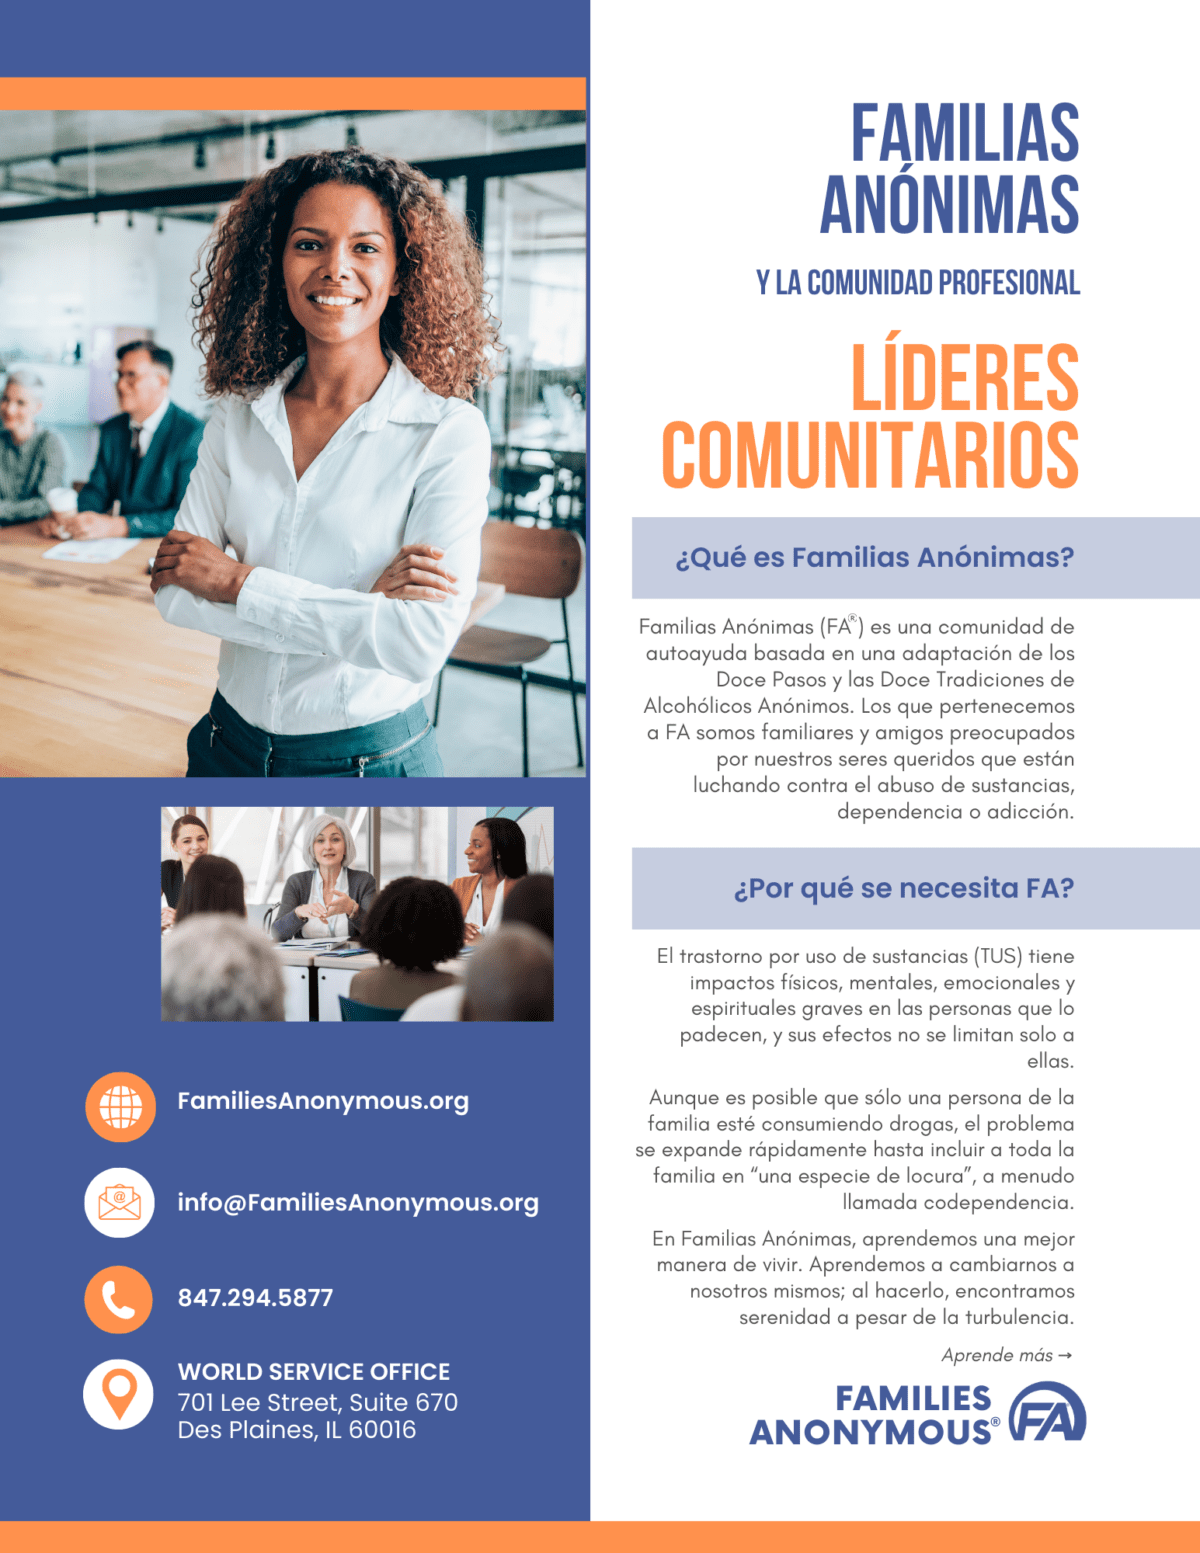 Families Anonymous and the Professional Community – Community Leaders – SPANISH